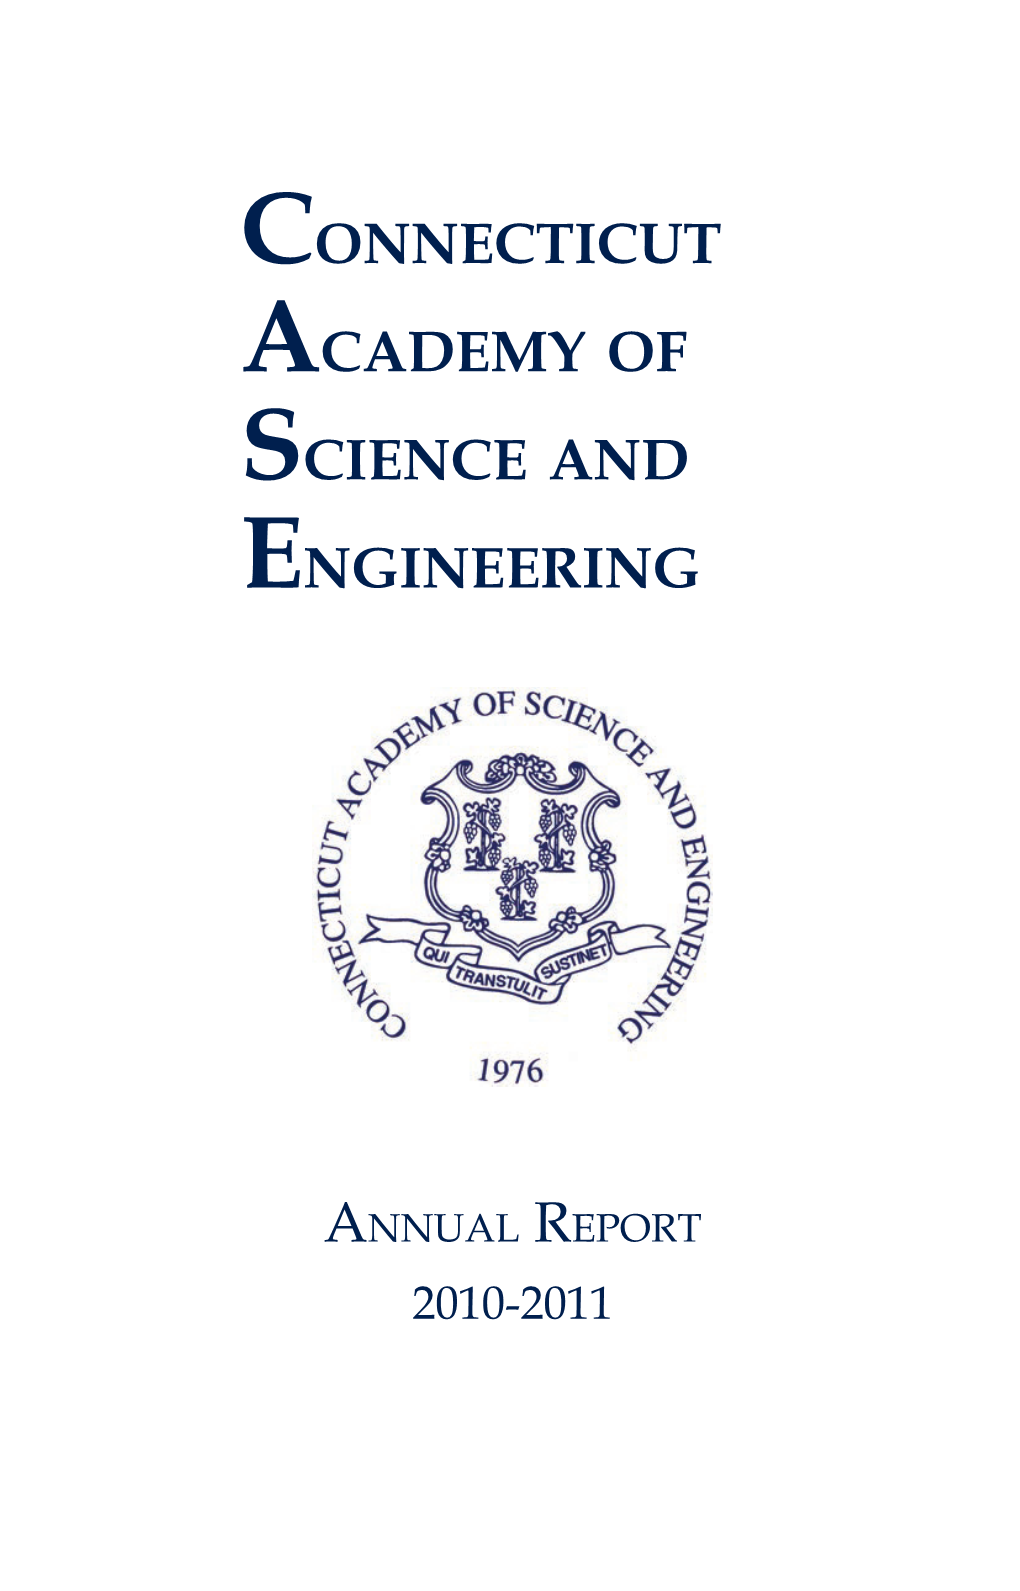 Annual Report 2010-2011 Connecticut Academy of Science and Engineering